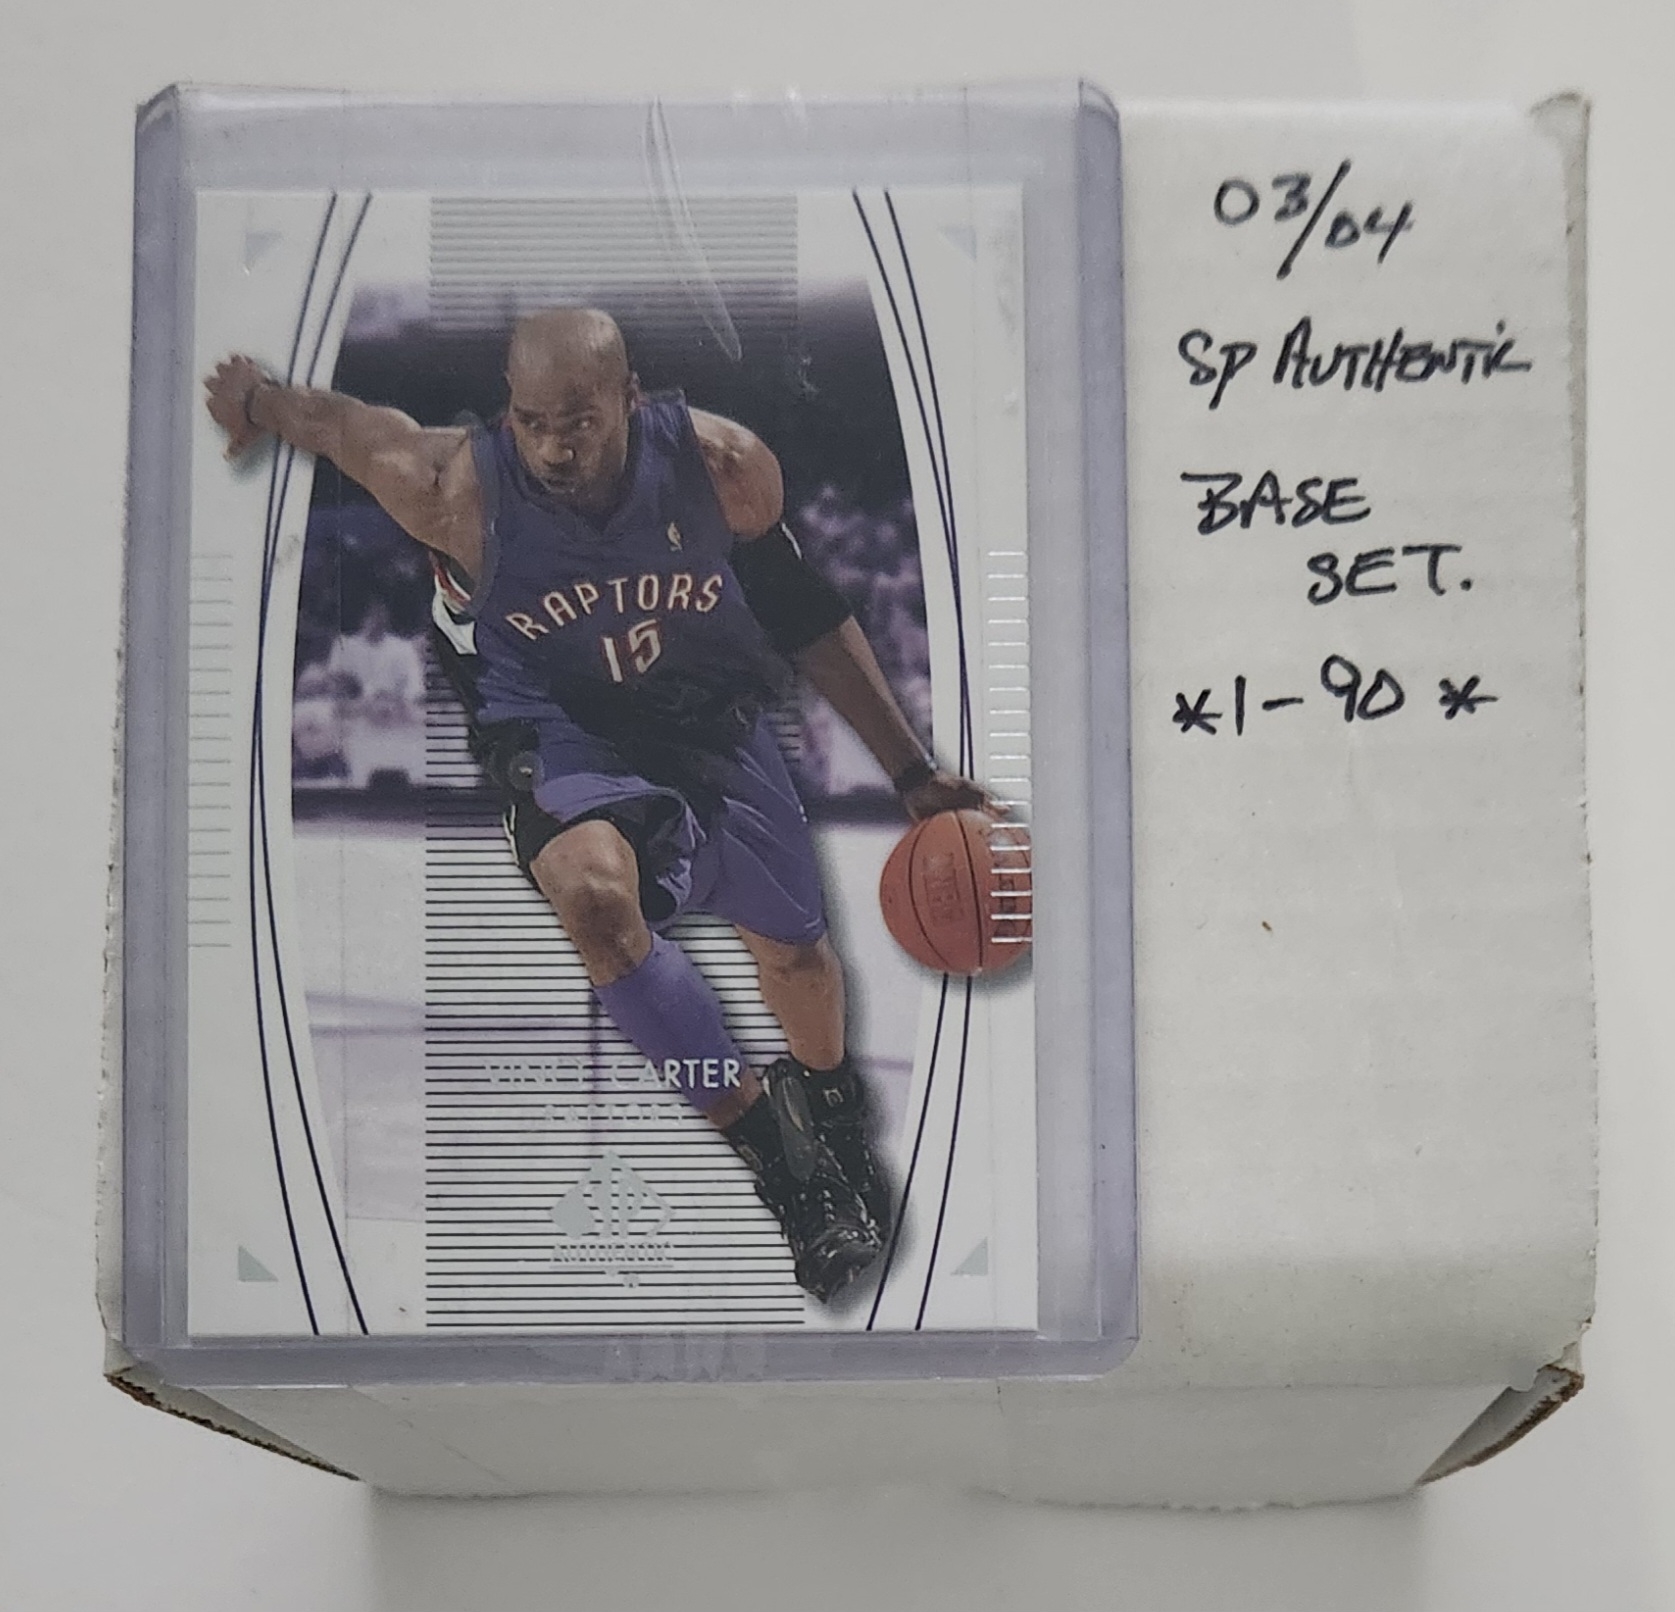 2003-04 Upper Deck SP Authentic NBA Trading Cards Base Set